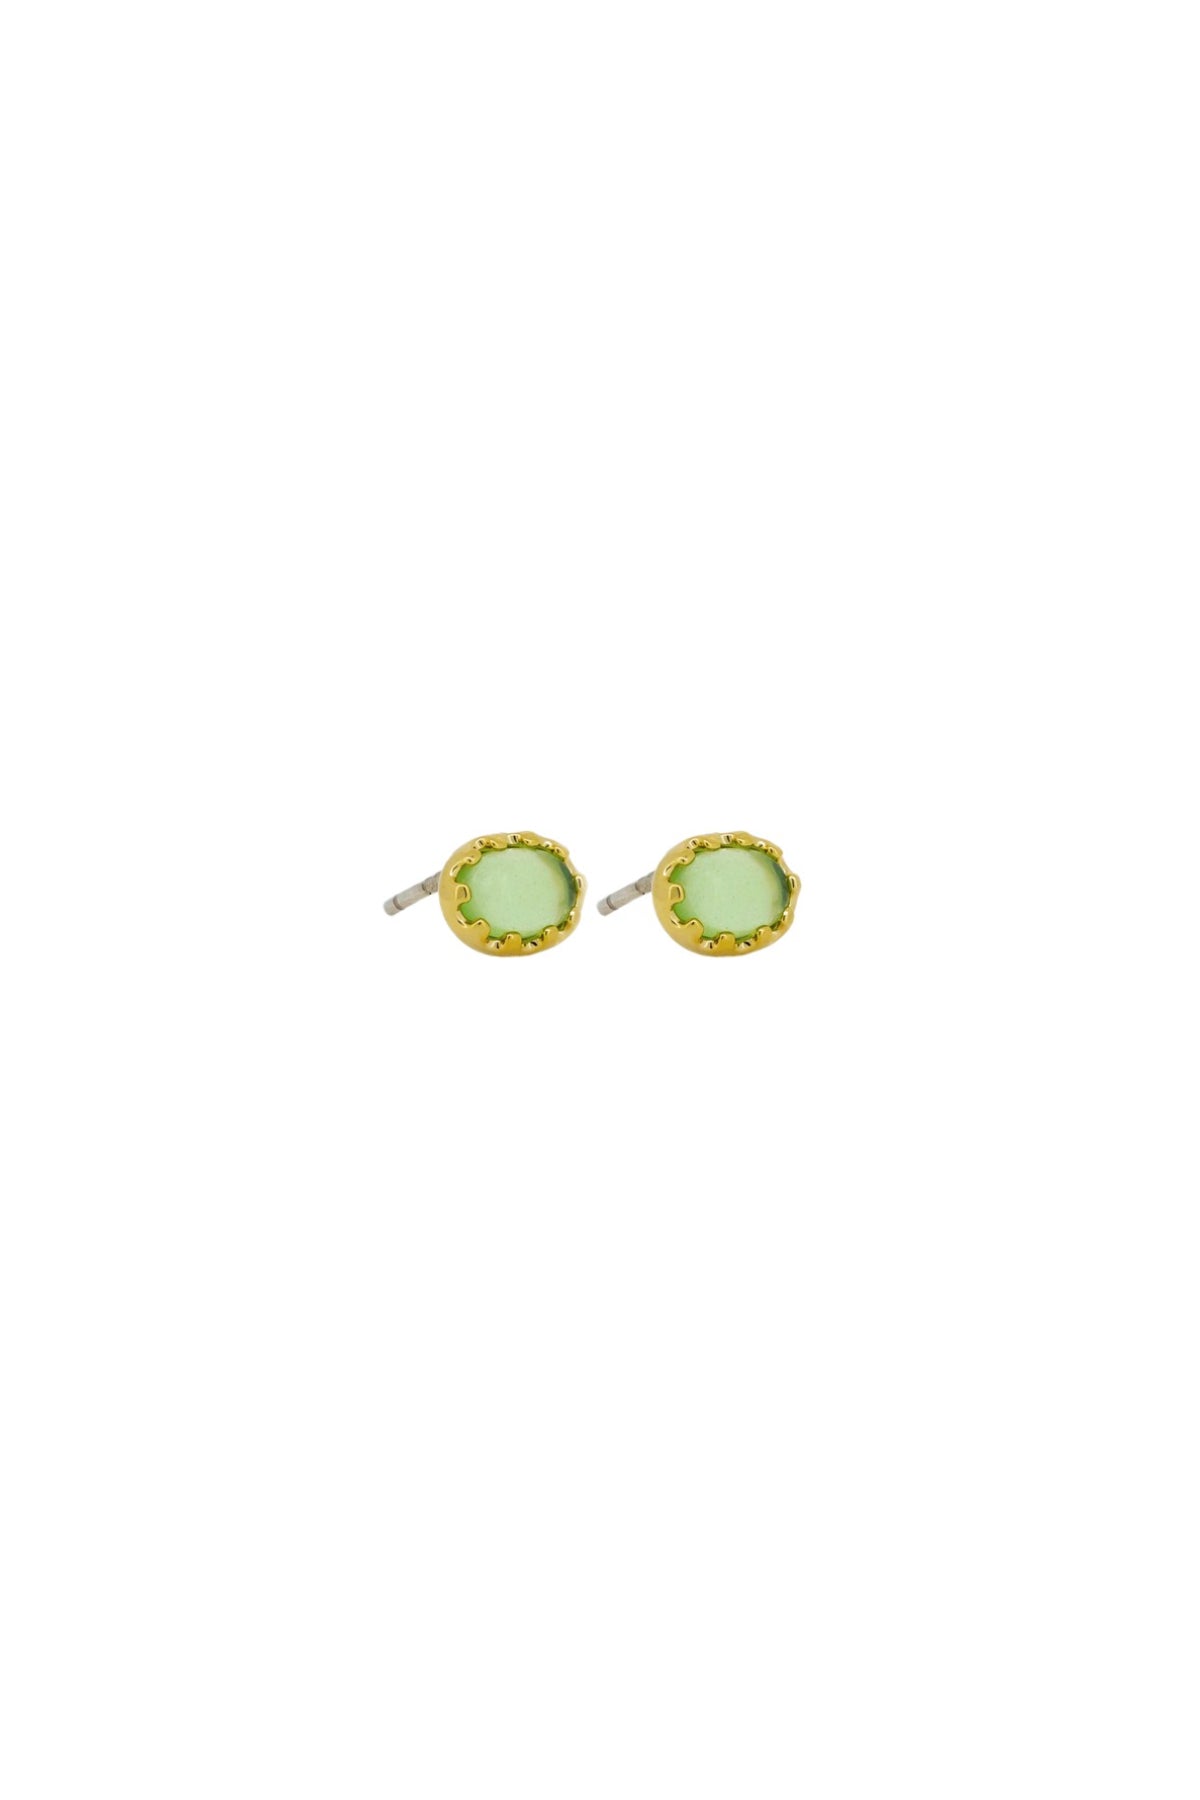 Gold & Green Oval Studs